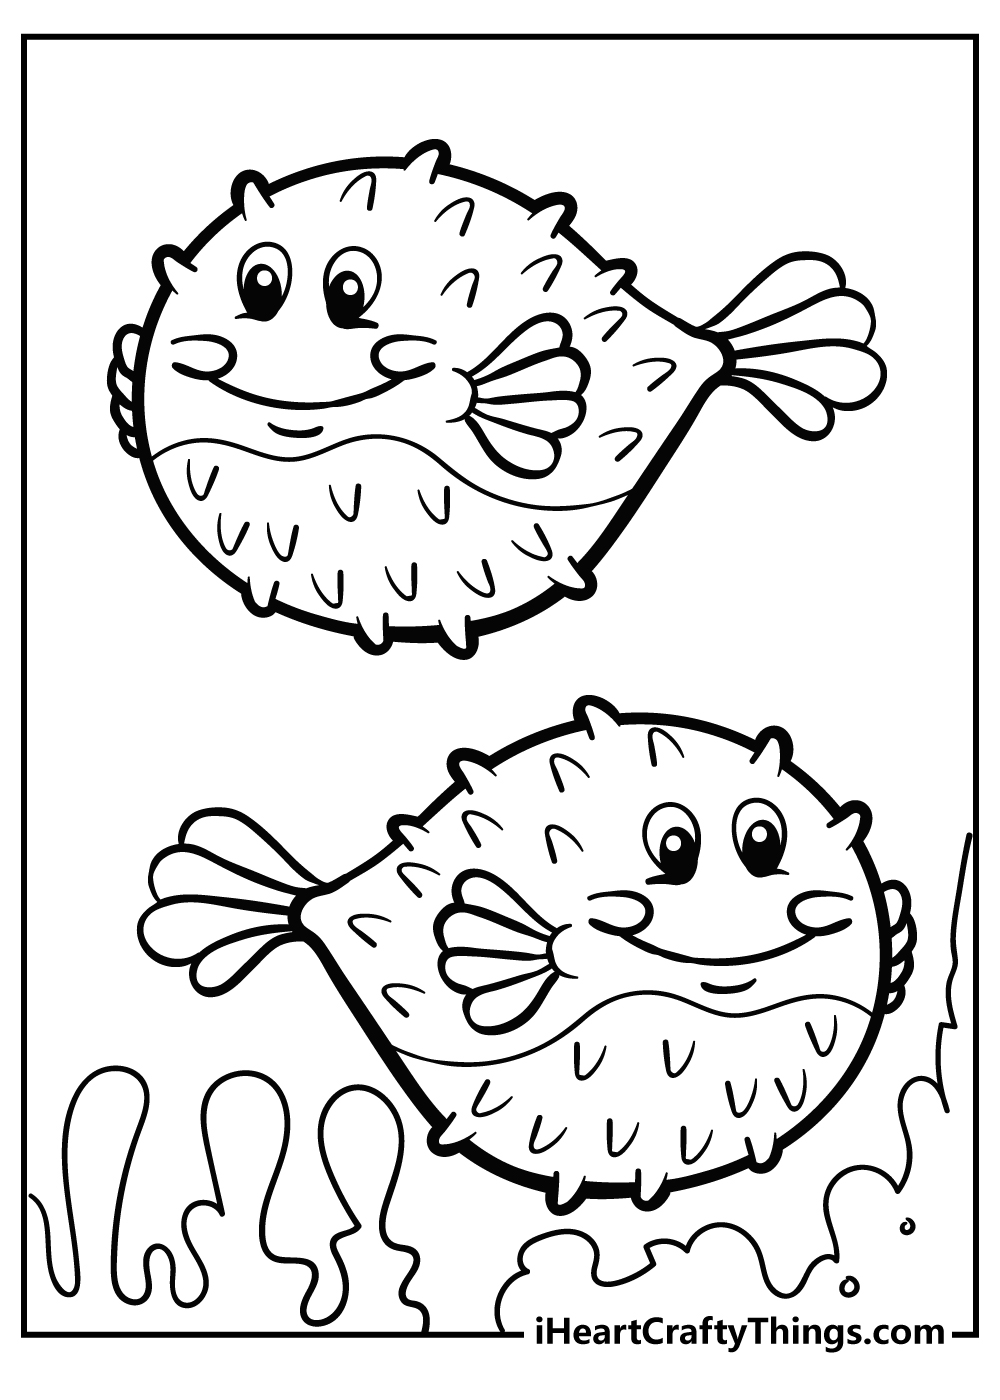 Sea creatures coloring pages free printables